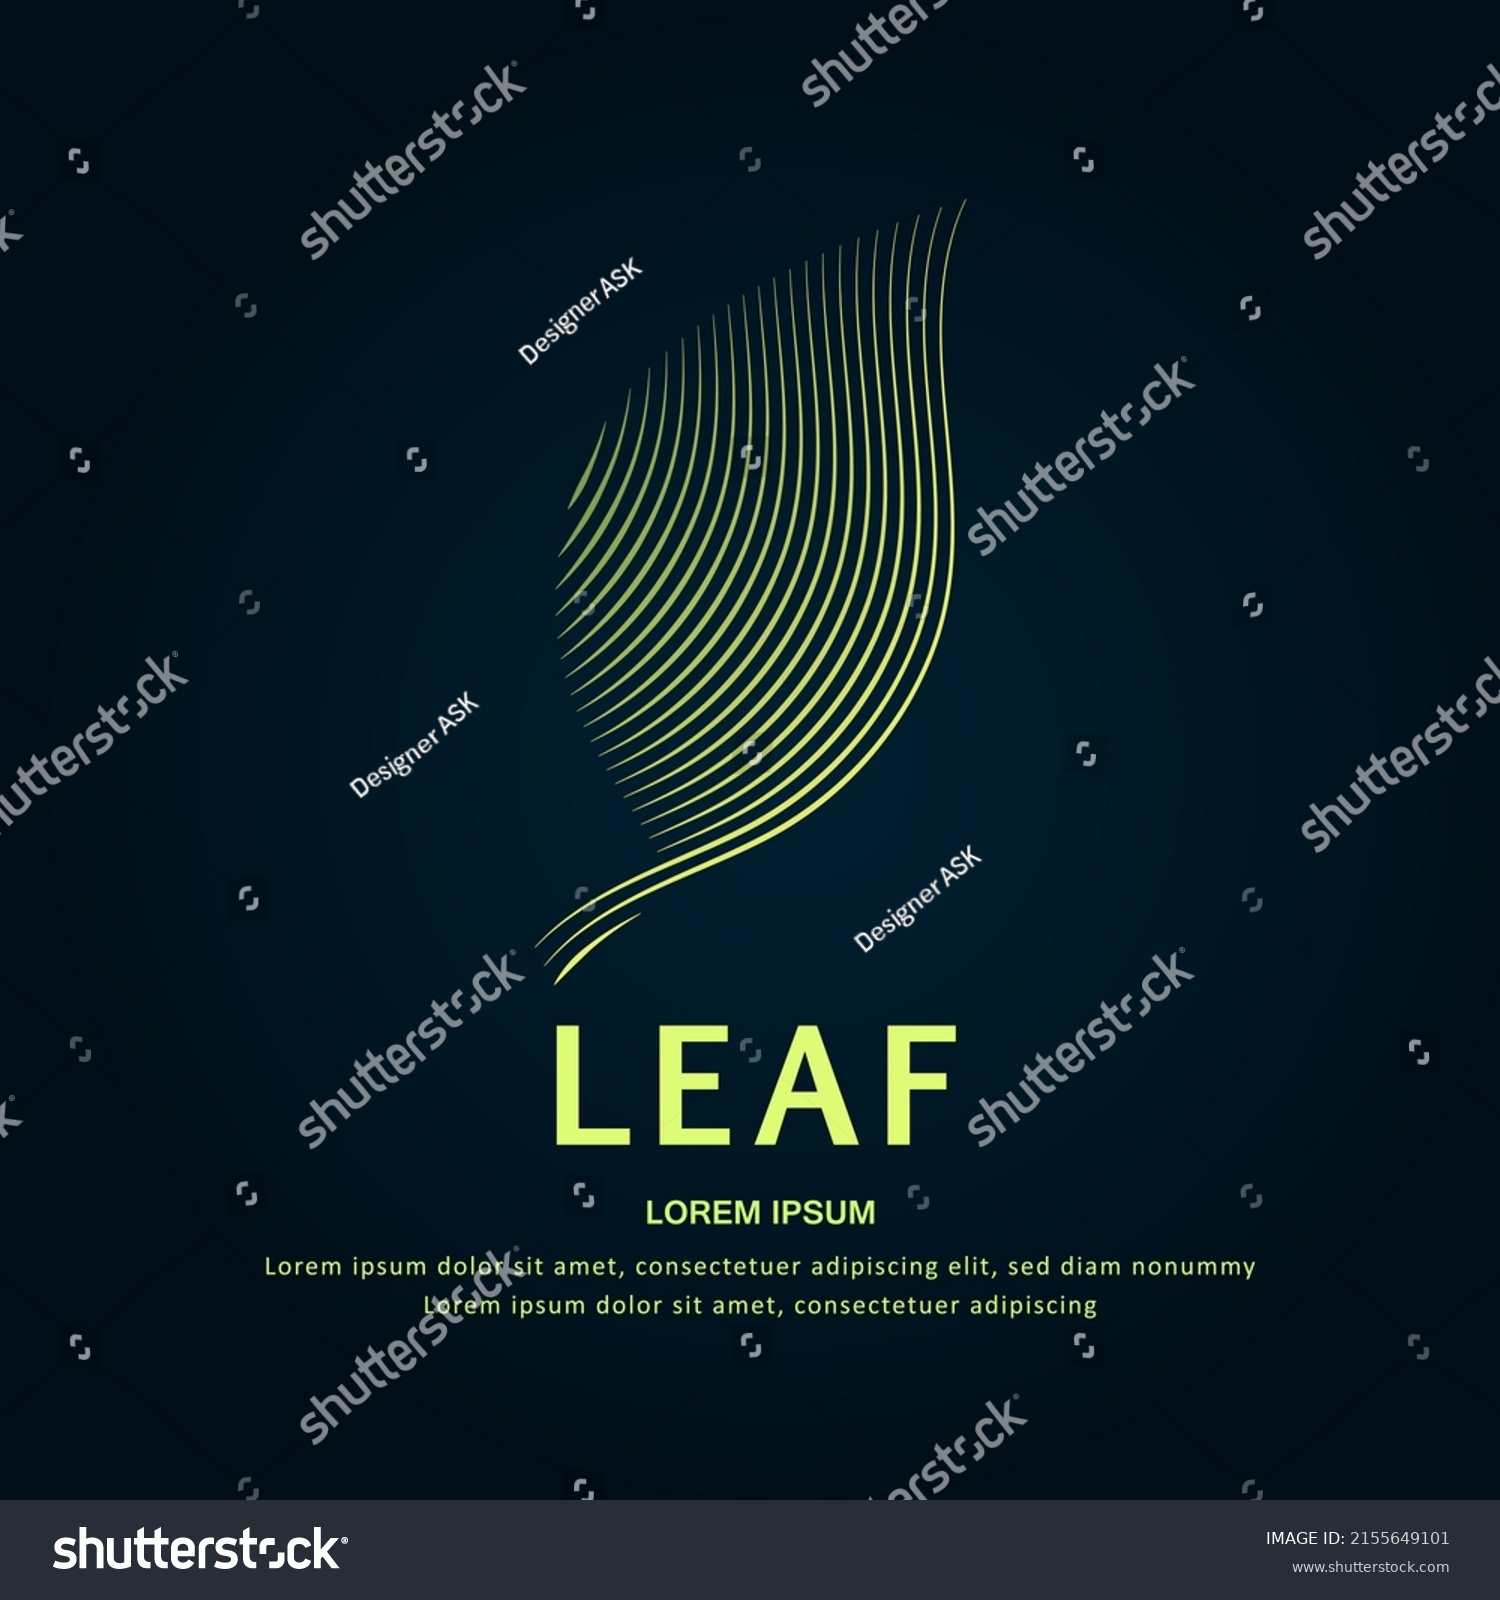 SVG of simple logo leaf Illustration in a linear style. Abstract line art green leaf Ecology Logotype concept icon. Vector illustration suitable for organization, company, or community. EPS 10 svg